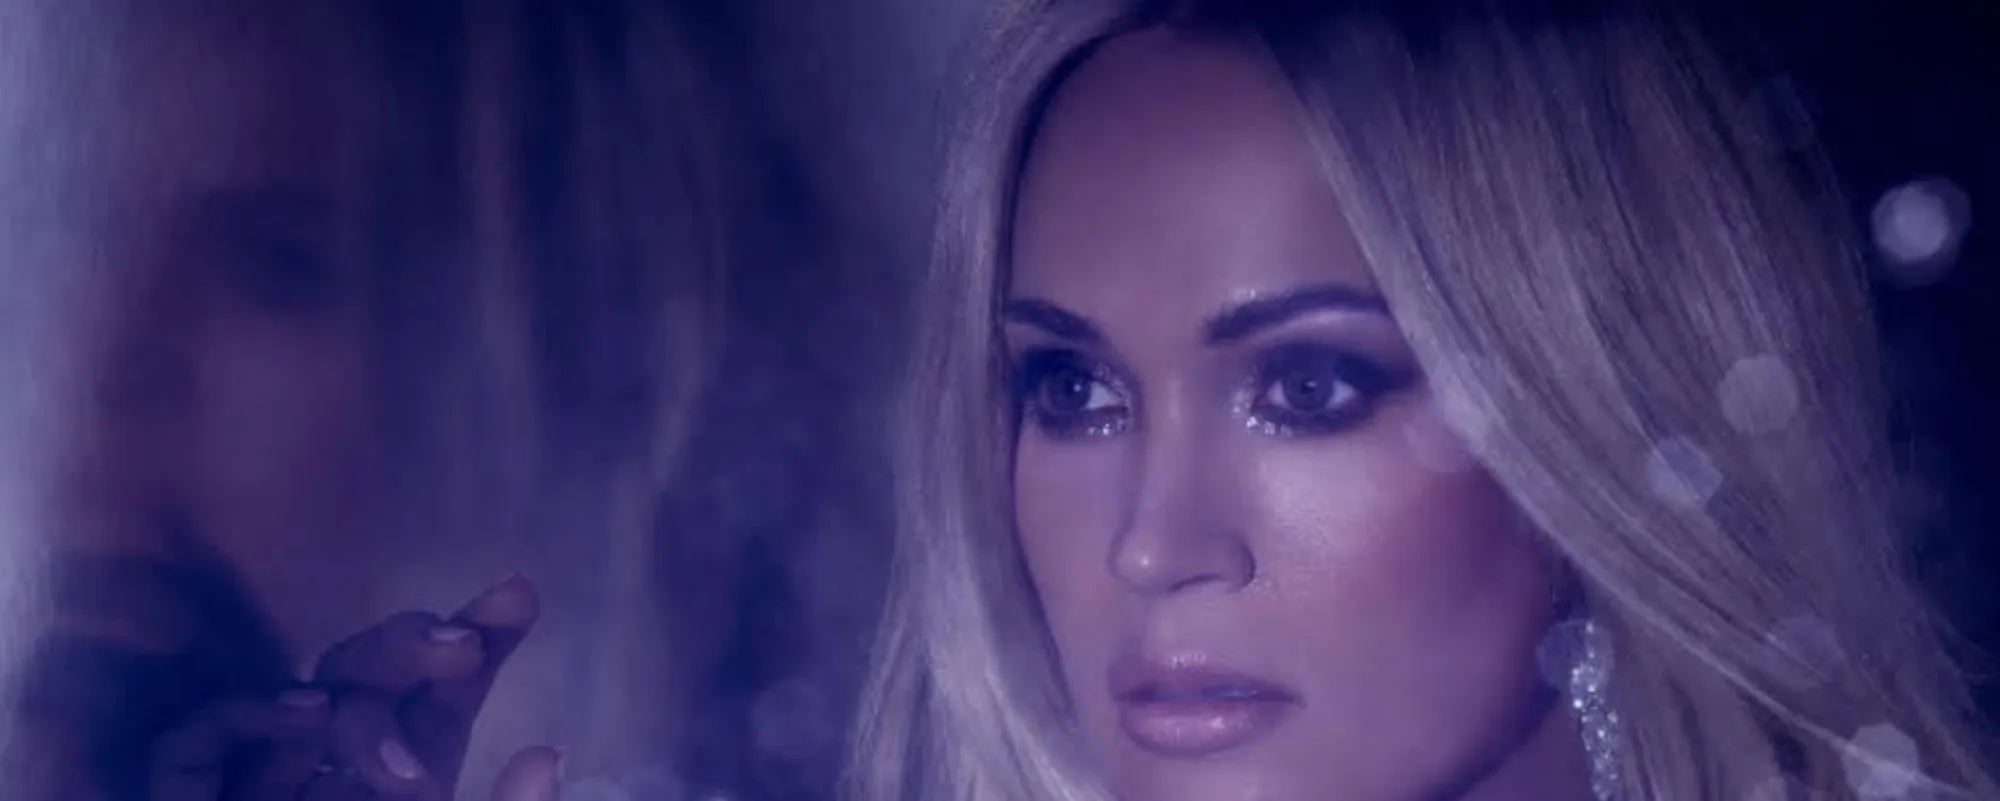 Carrie Underwood Creates a New Kind of Revenge Song with “Ghost Story”